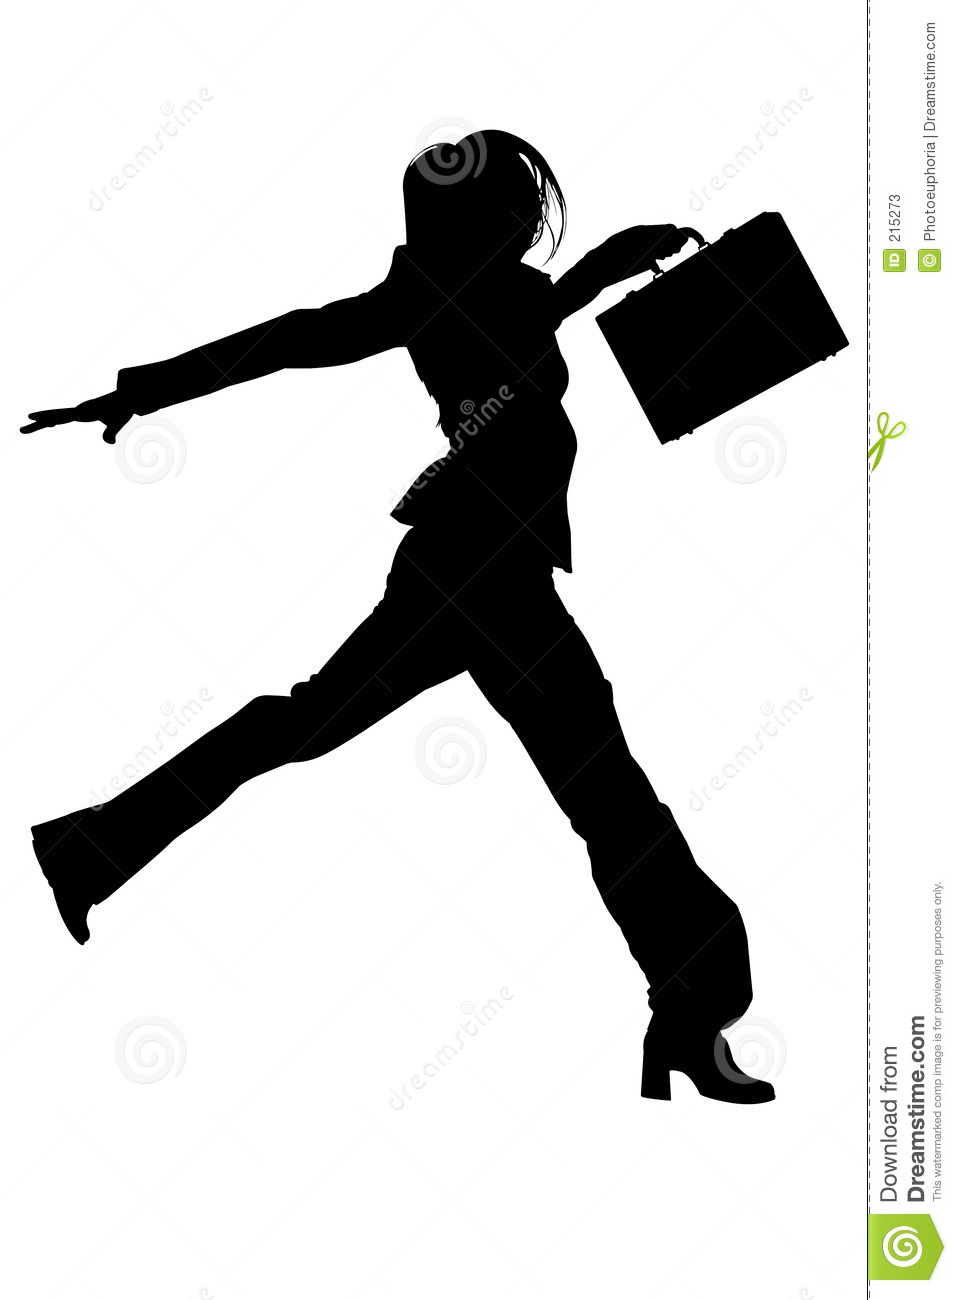 Path Of Woman In Suit With Briefcase Ju Stock Photos   Image  215273